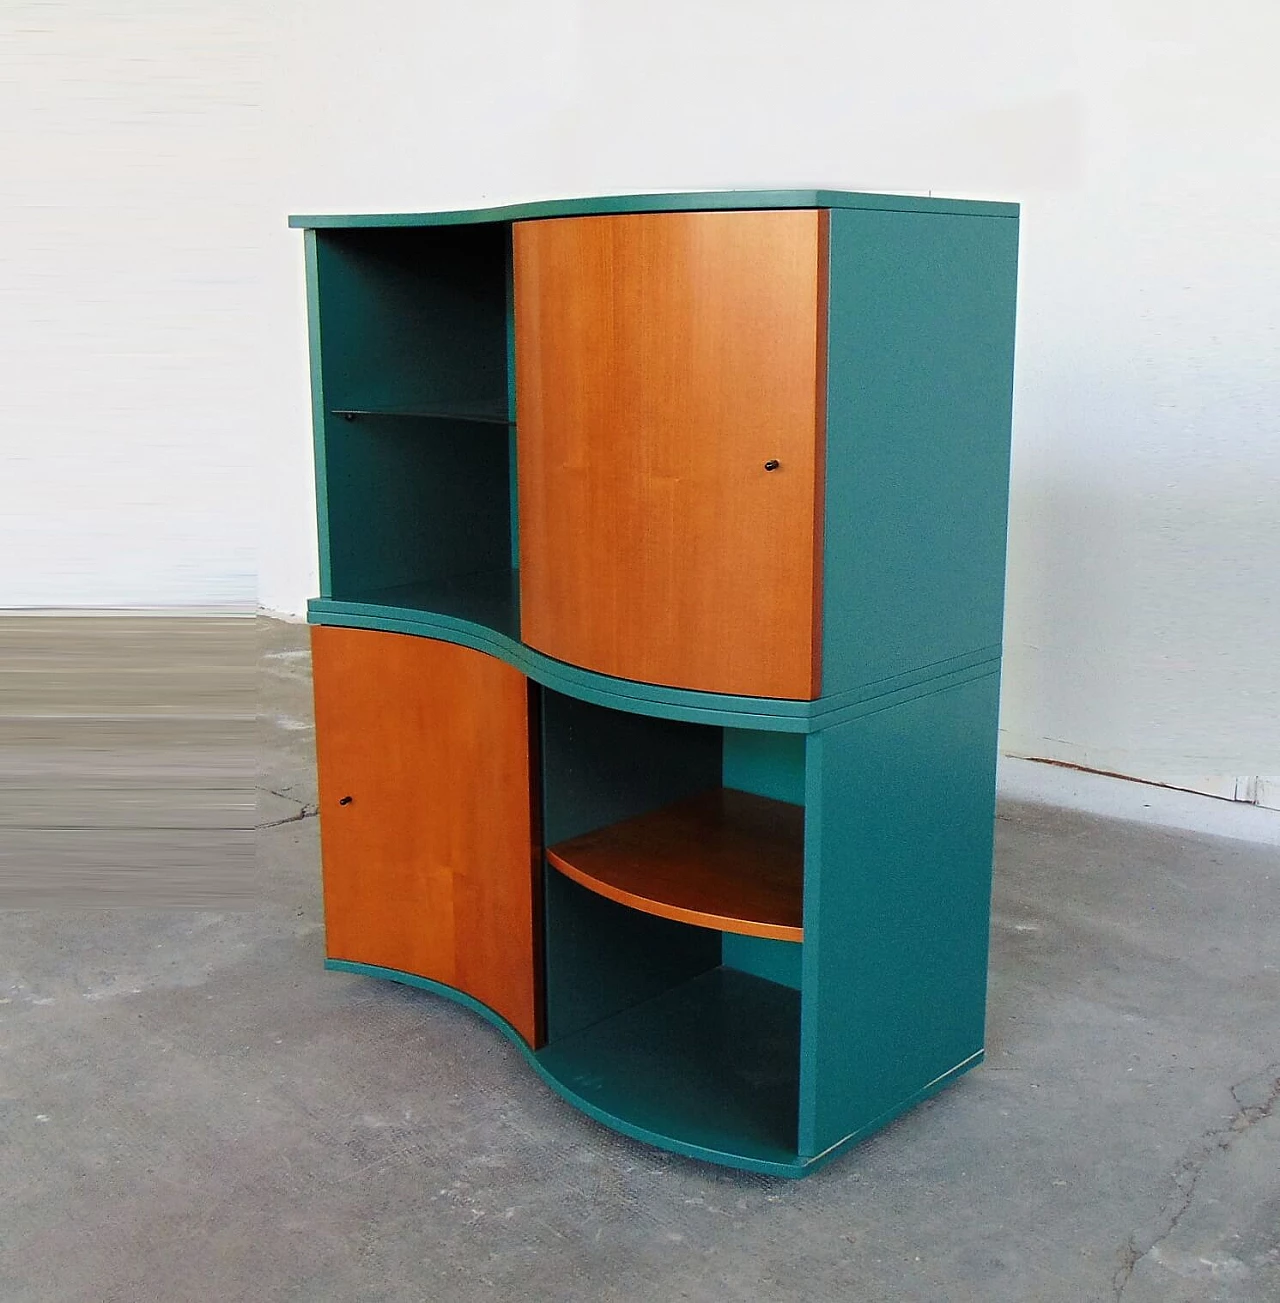 Sideboard Green Satin Lacquer, Doors in Walnut-Stained Cherry, for Roche Bobois, 1990s 1167292